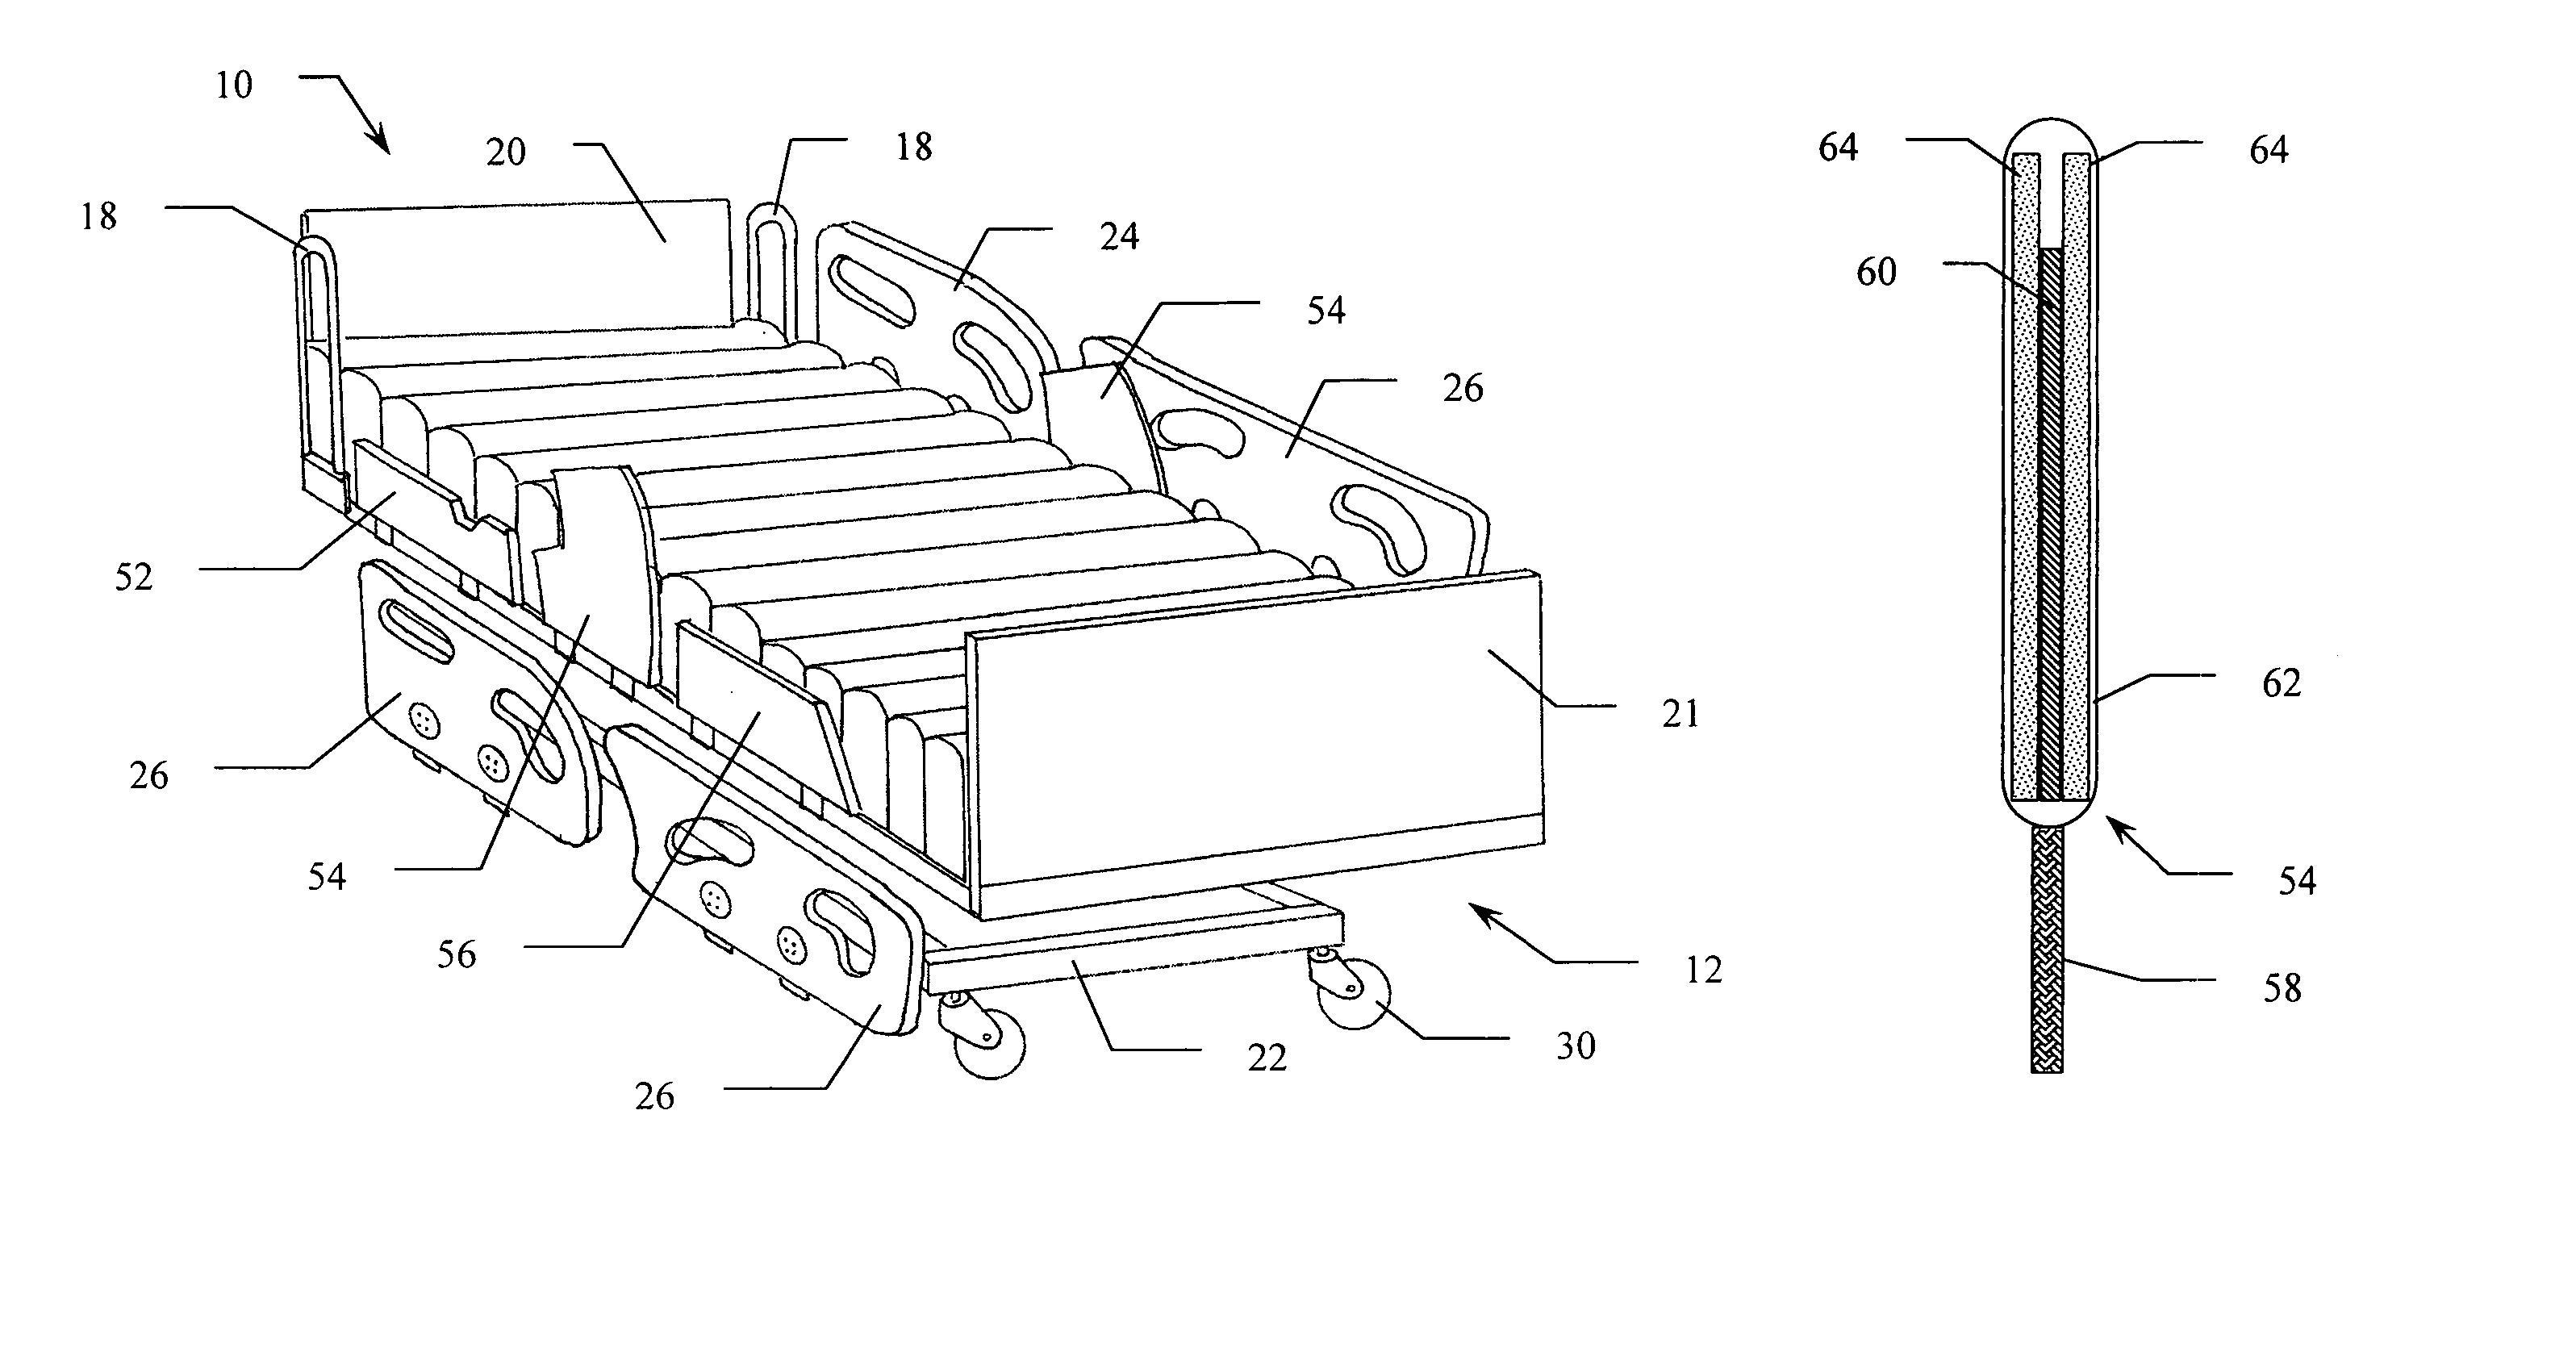 Side rail pad system for patient support apparatus